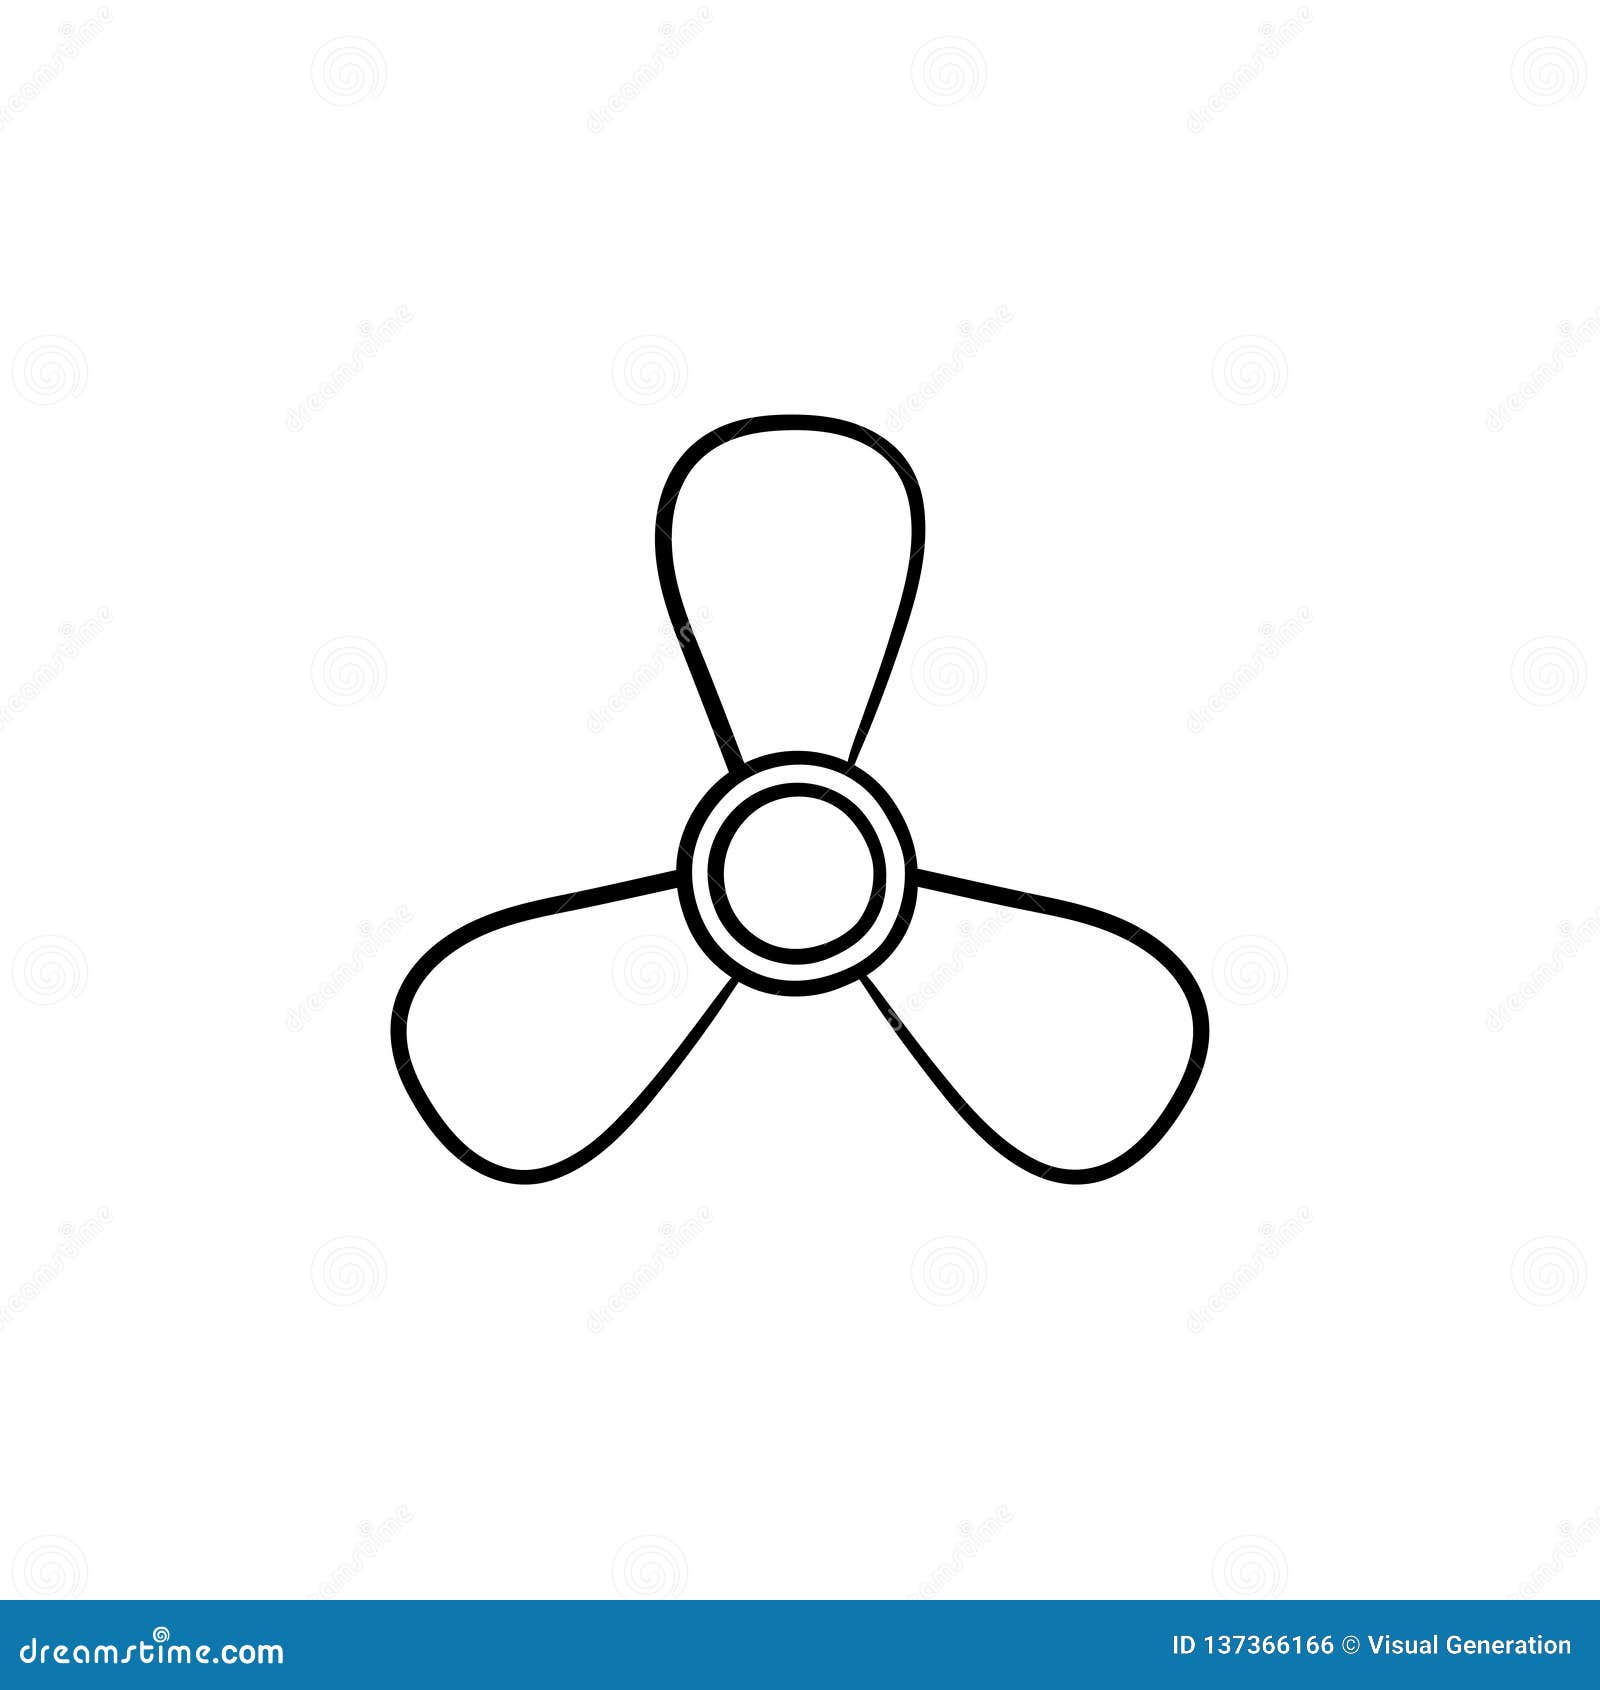 Premium Photo | A black and white drawing of a propeller